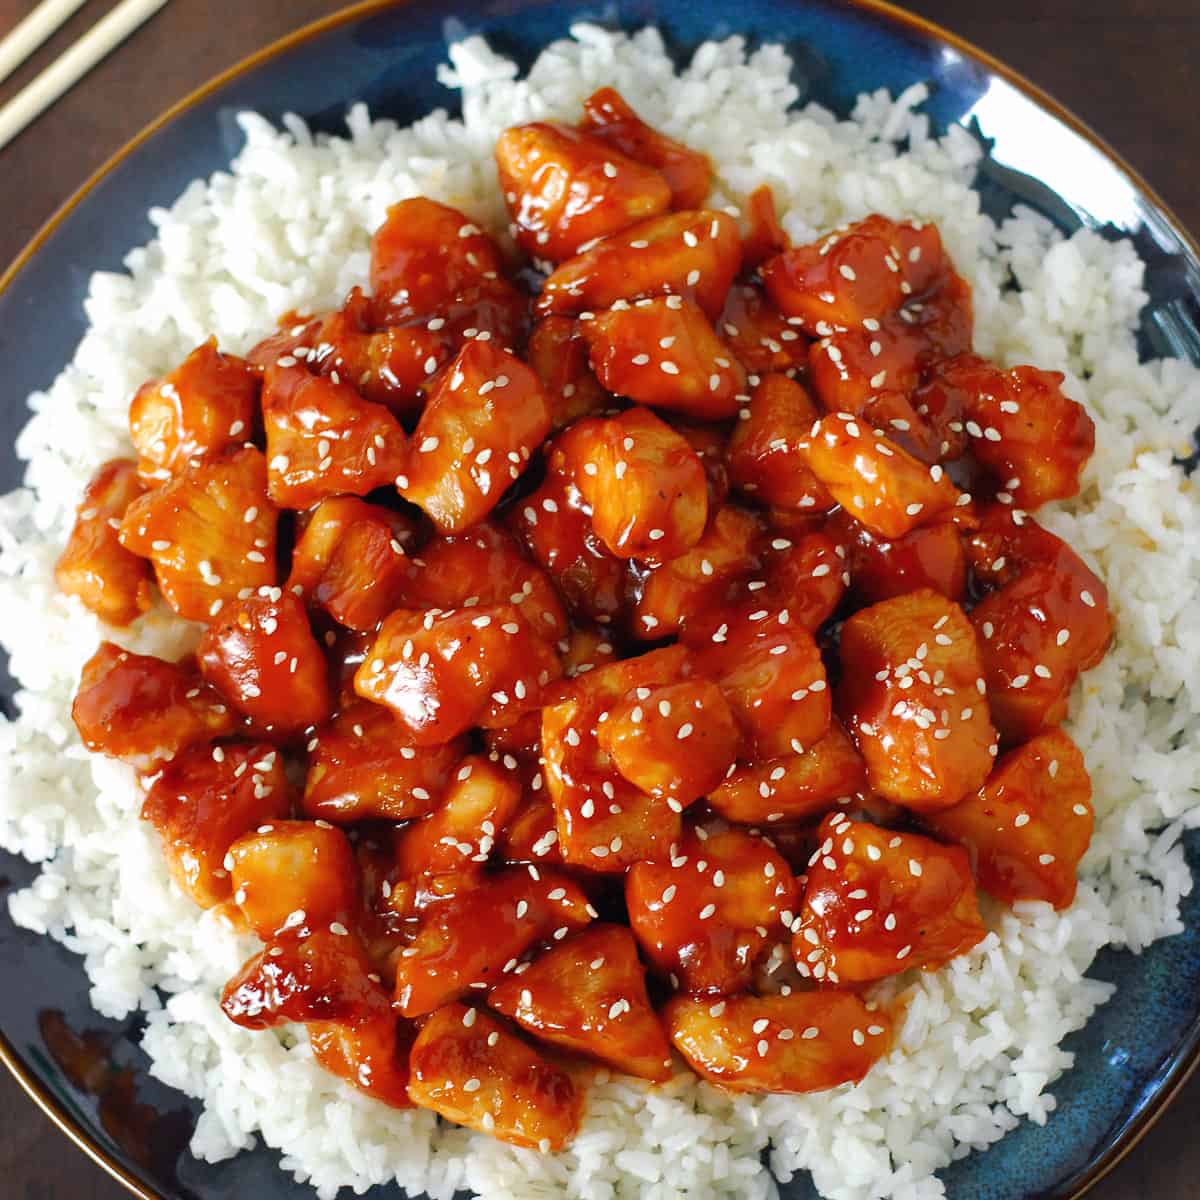 Orange chicken with rice on a blue plate.